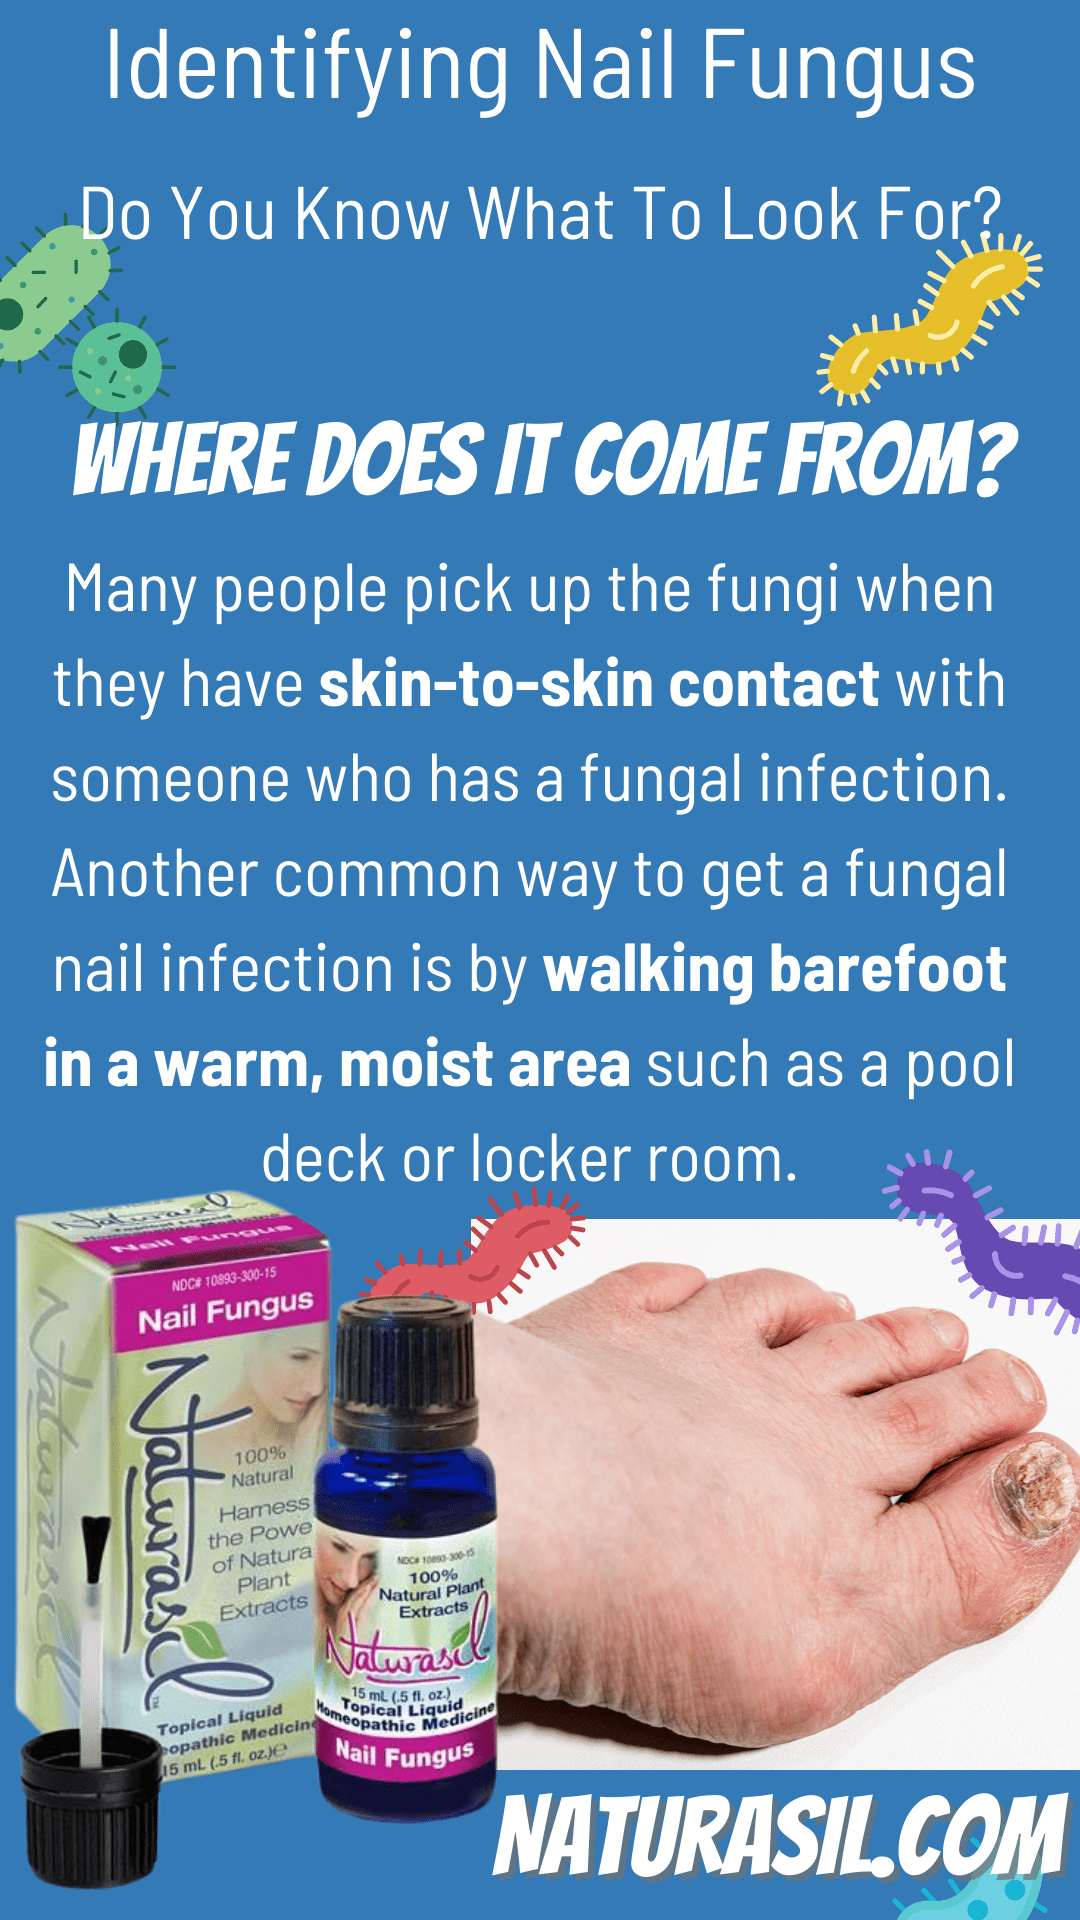 What Causes Nail Fungus?: Town Center Foot & Ankle: Podiatry